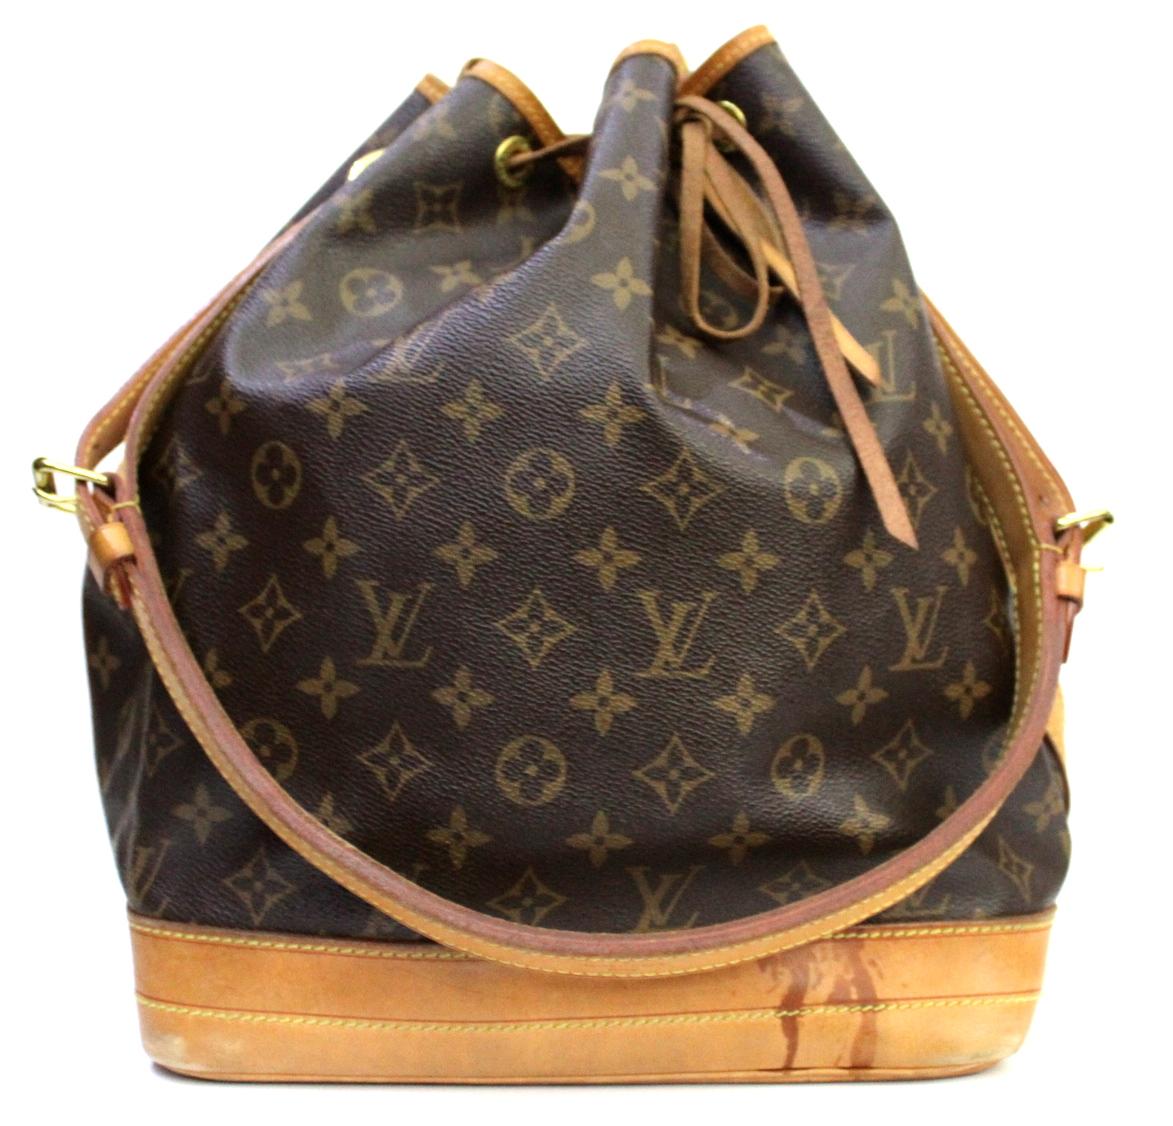 The Louis Vuitton Monogram Canvas Petit Noe Bag is a timeless and favored piece that will never go out of style. It was originally created in 1932 to carry five bottles of Champagne. With its spacious interior and leather drawstring closure, this